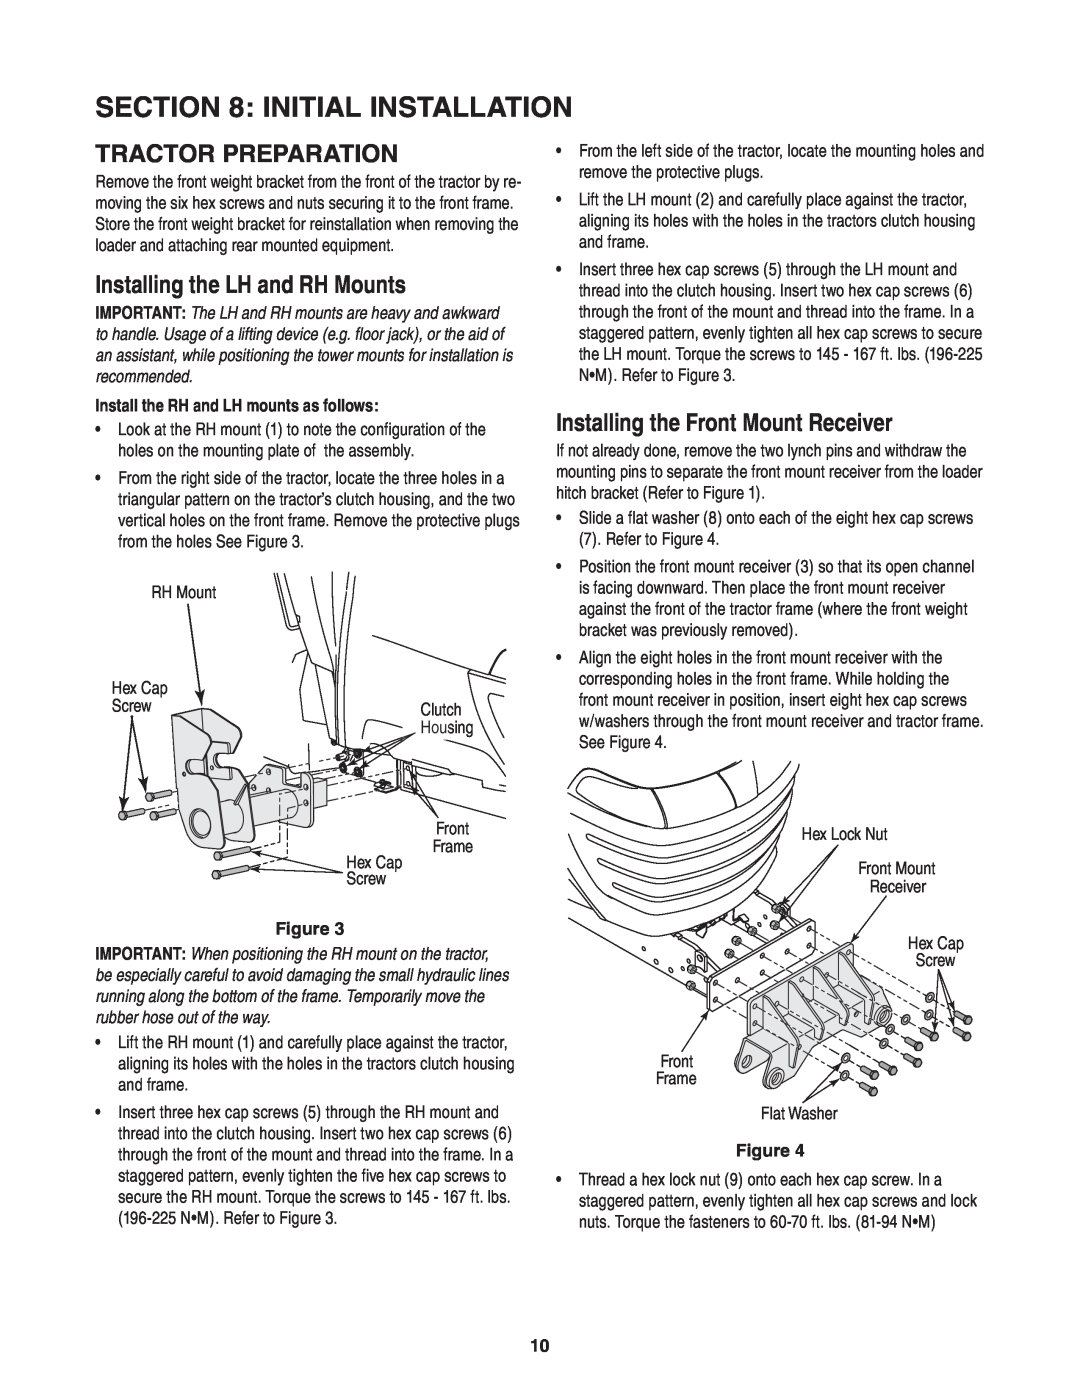 Cub Cadet 59A40003727 manual Initial Installation, Tractor Preparation, Installing the LH and RH Mounts 